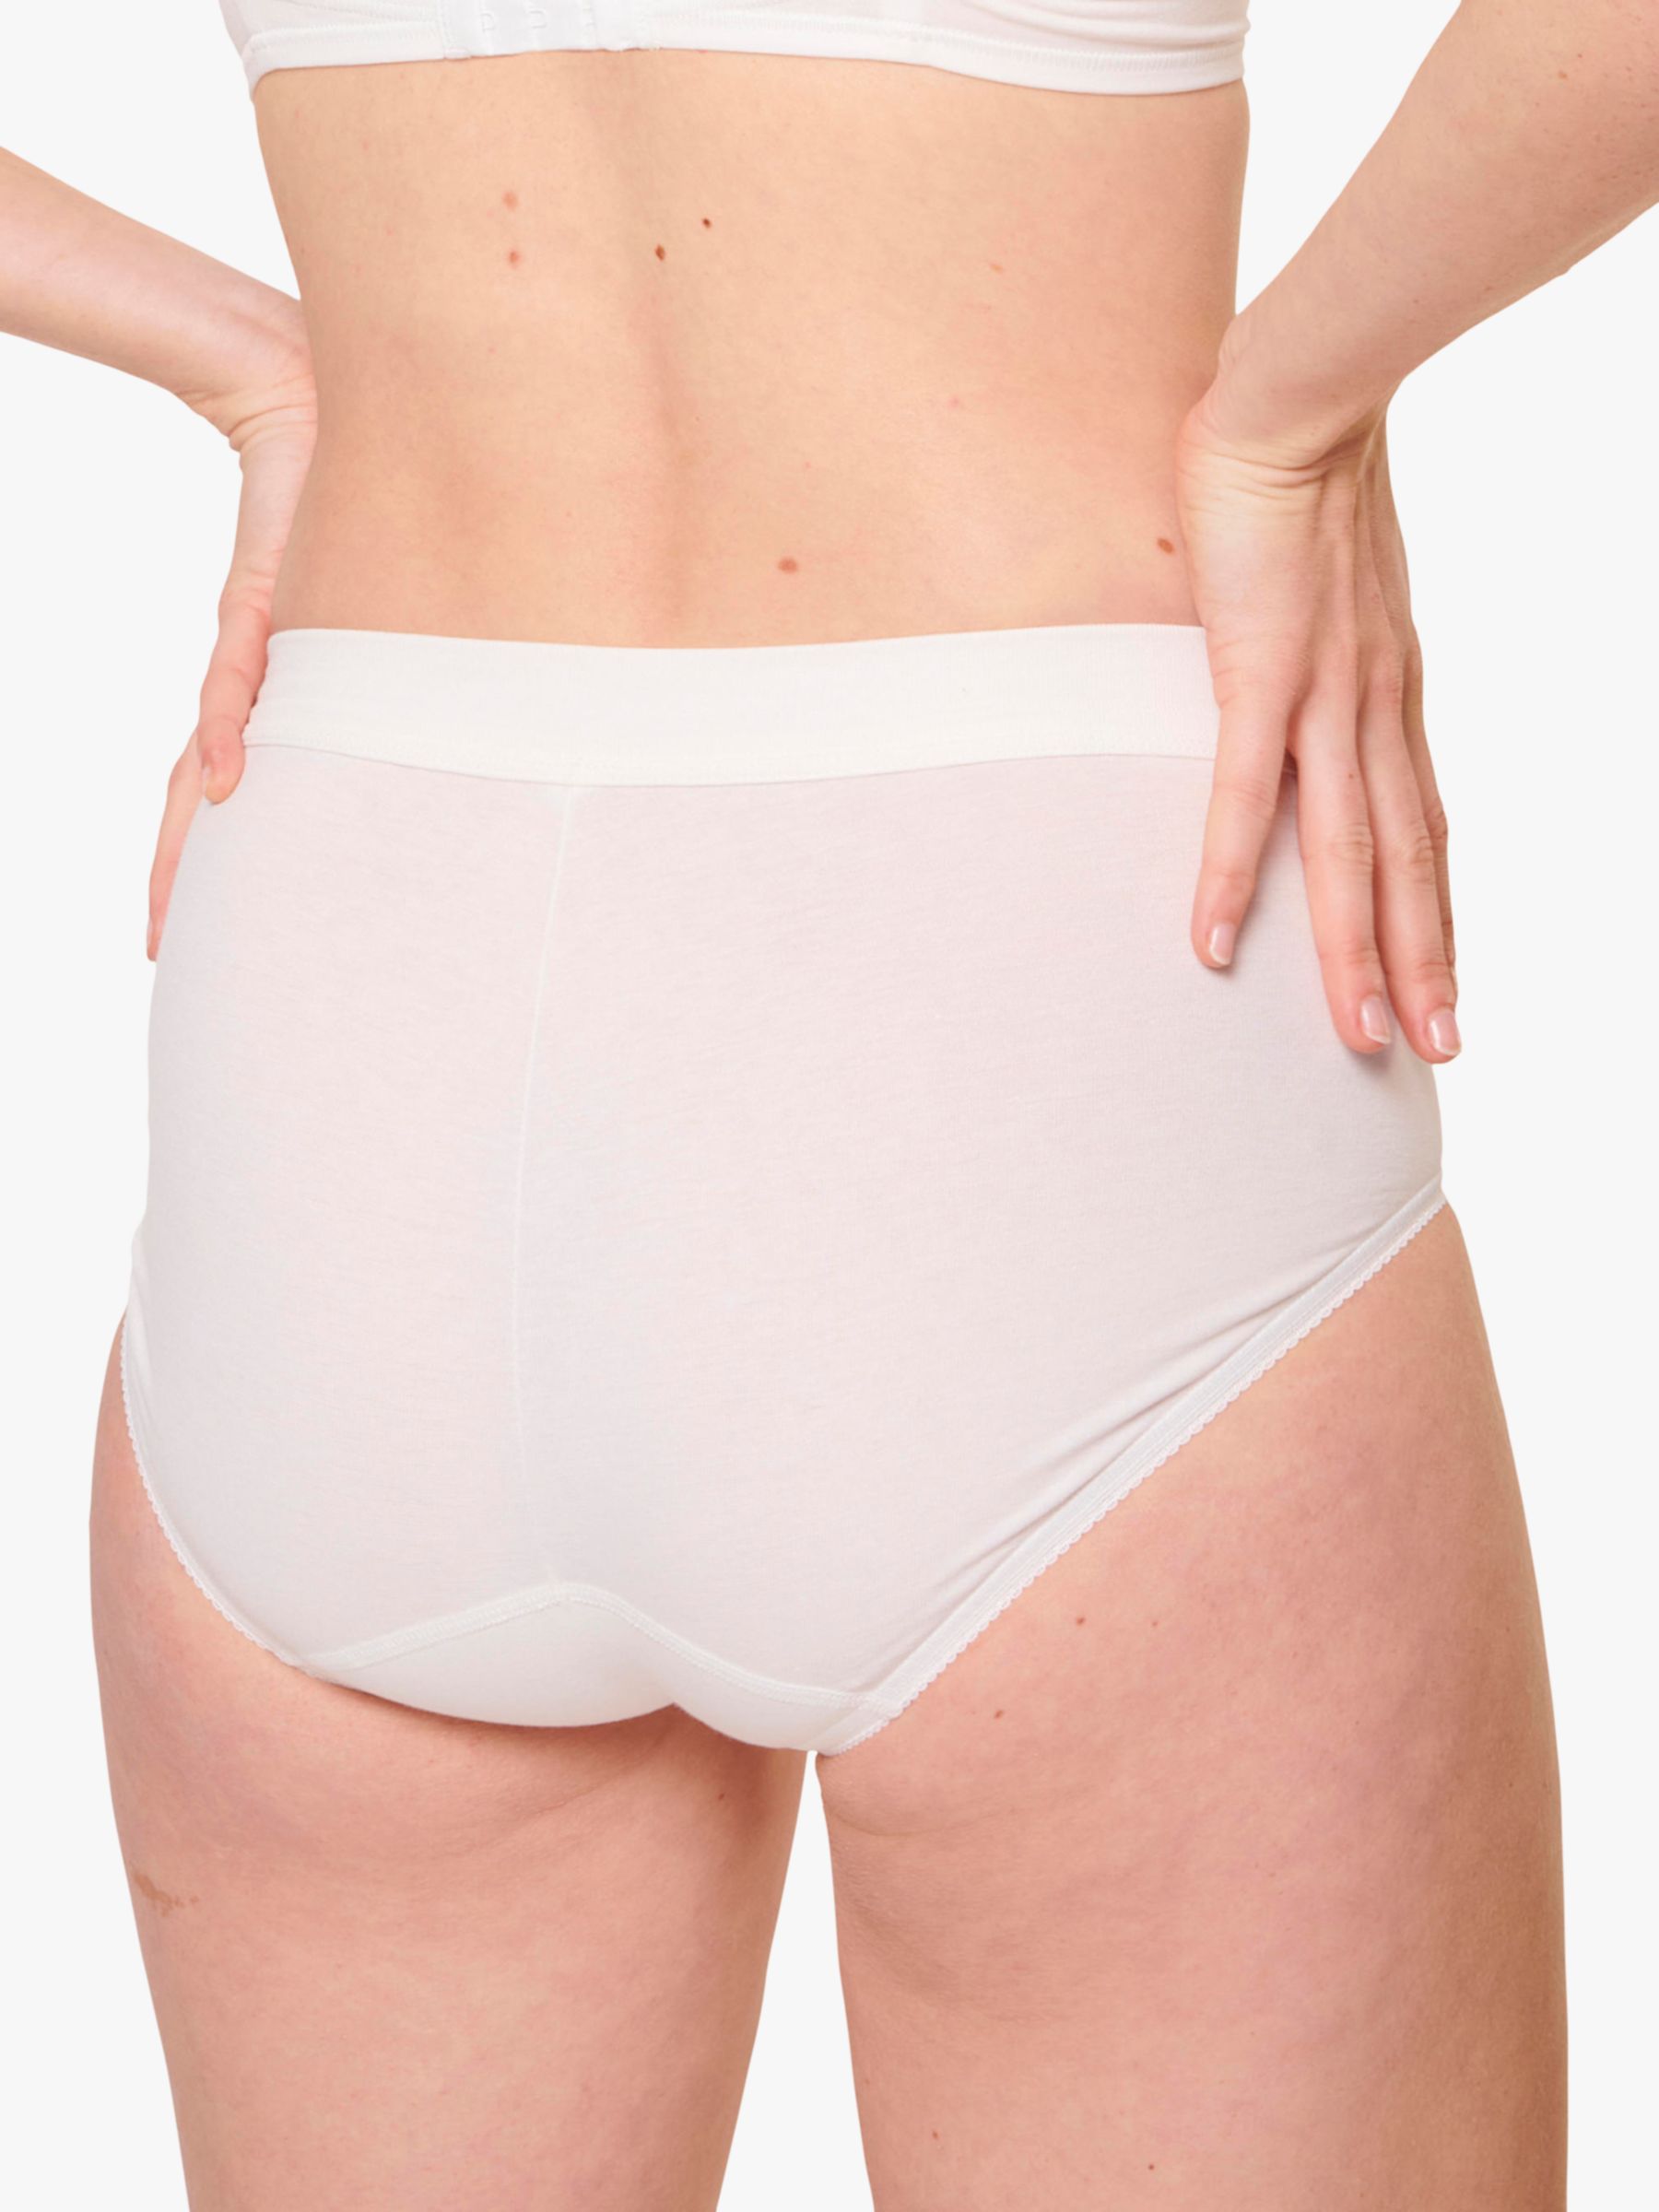 sloggi Double Comfort Maxi Knickers, Pack of 2, White, 10